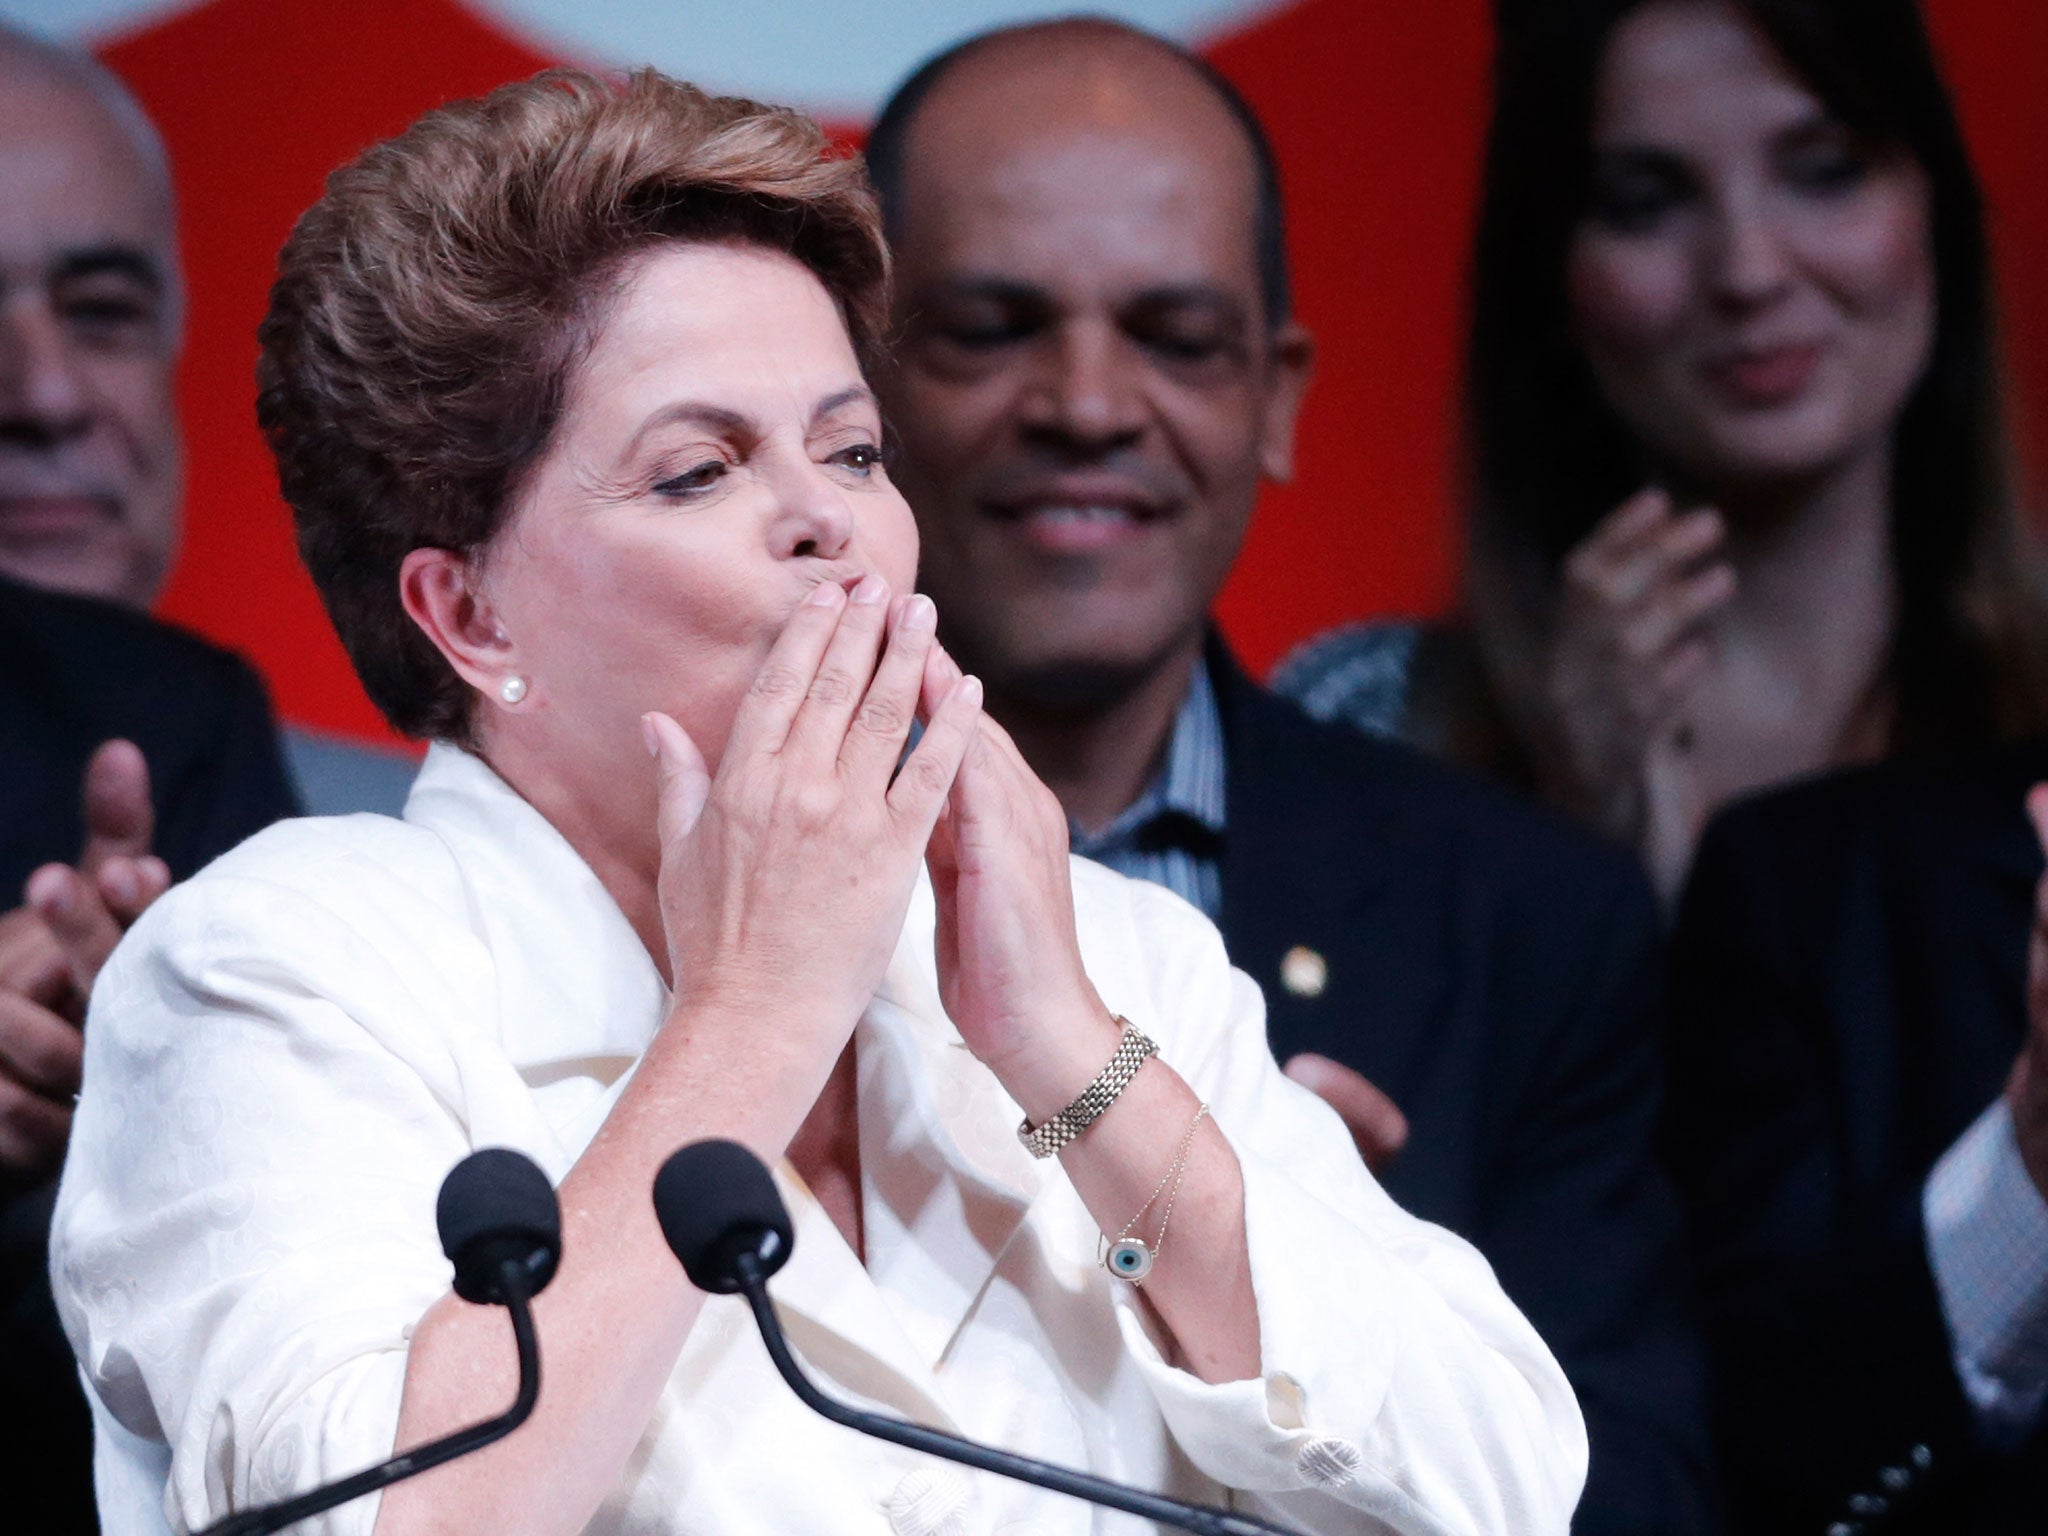 Brazil's President Dilma Rousseff blows kisses to supporters as she celebrates her victory